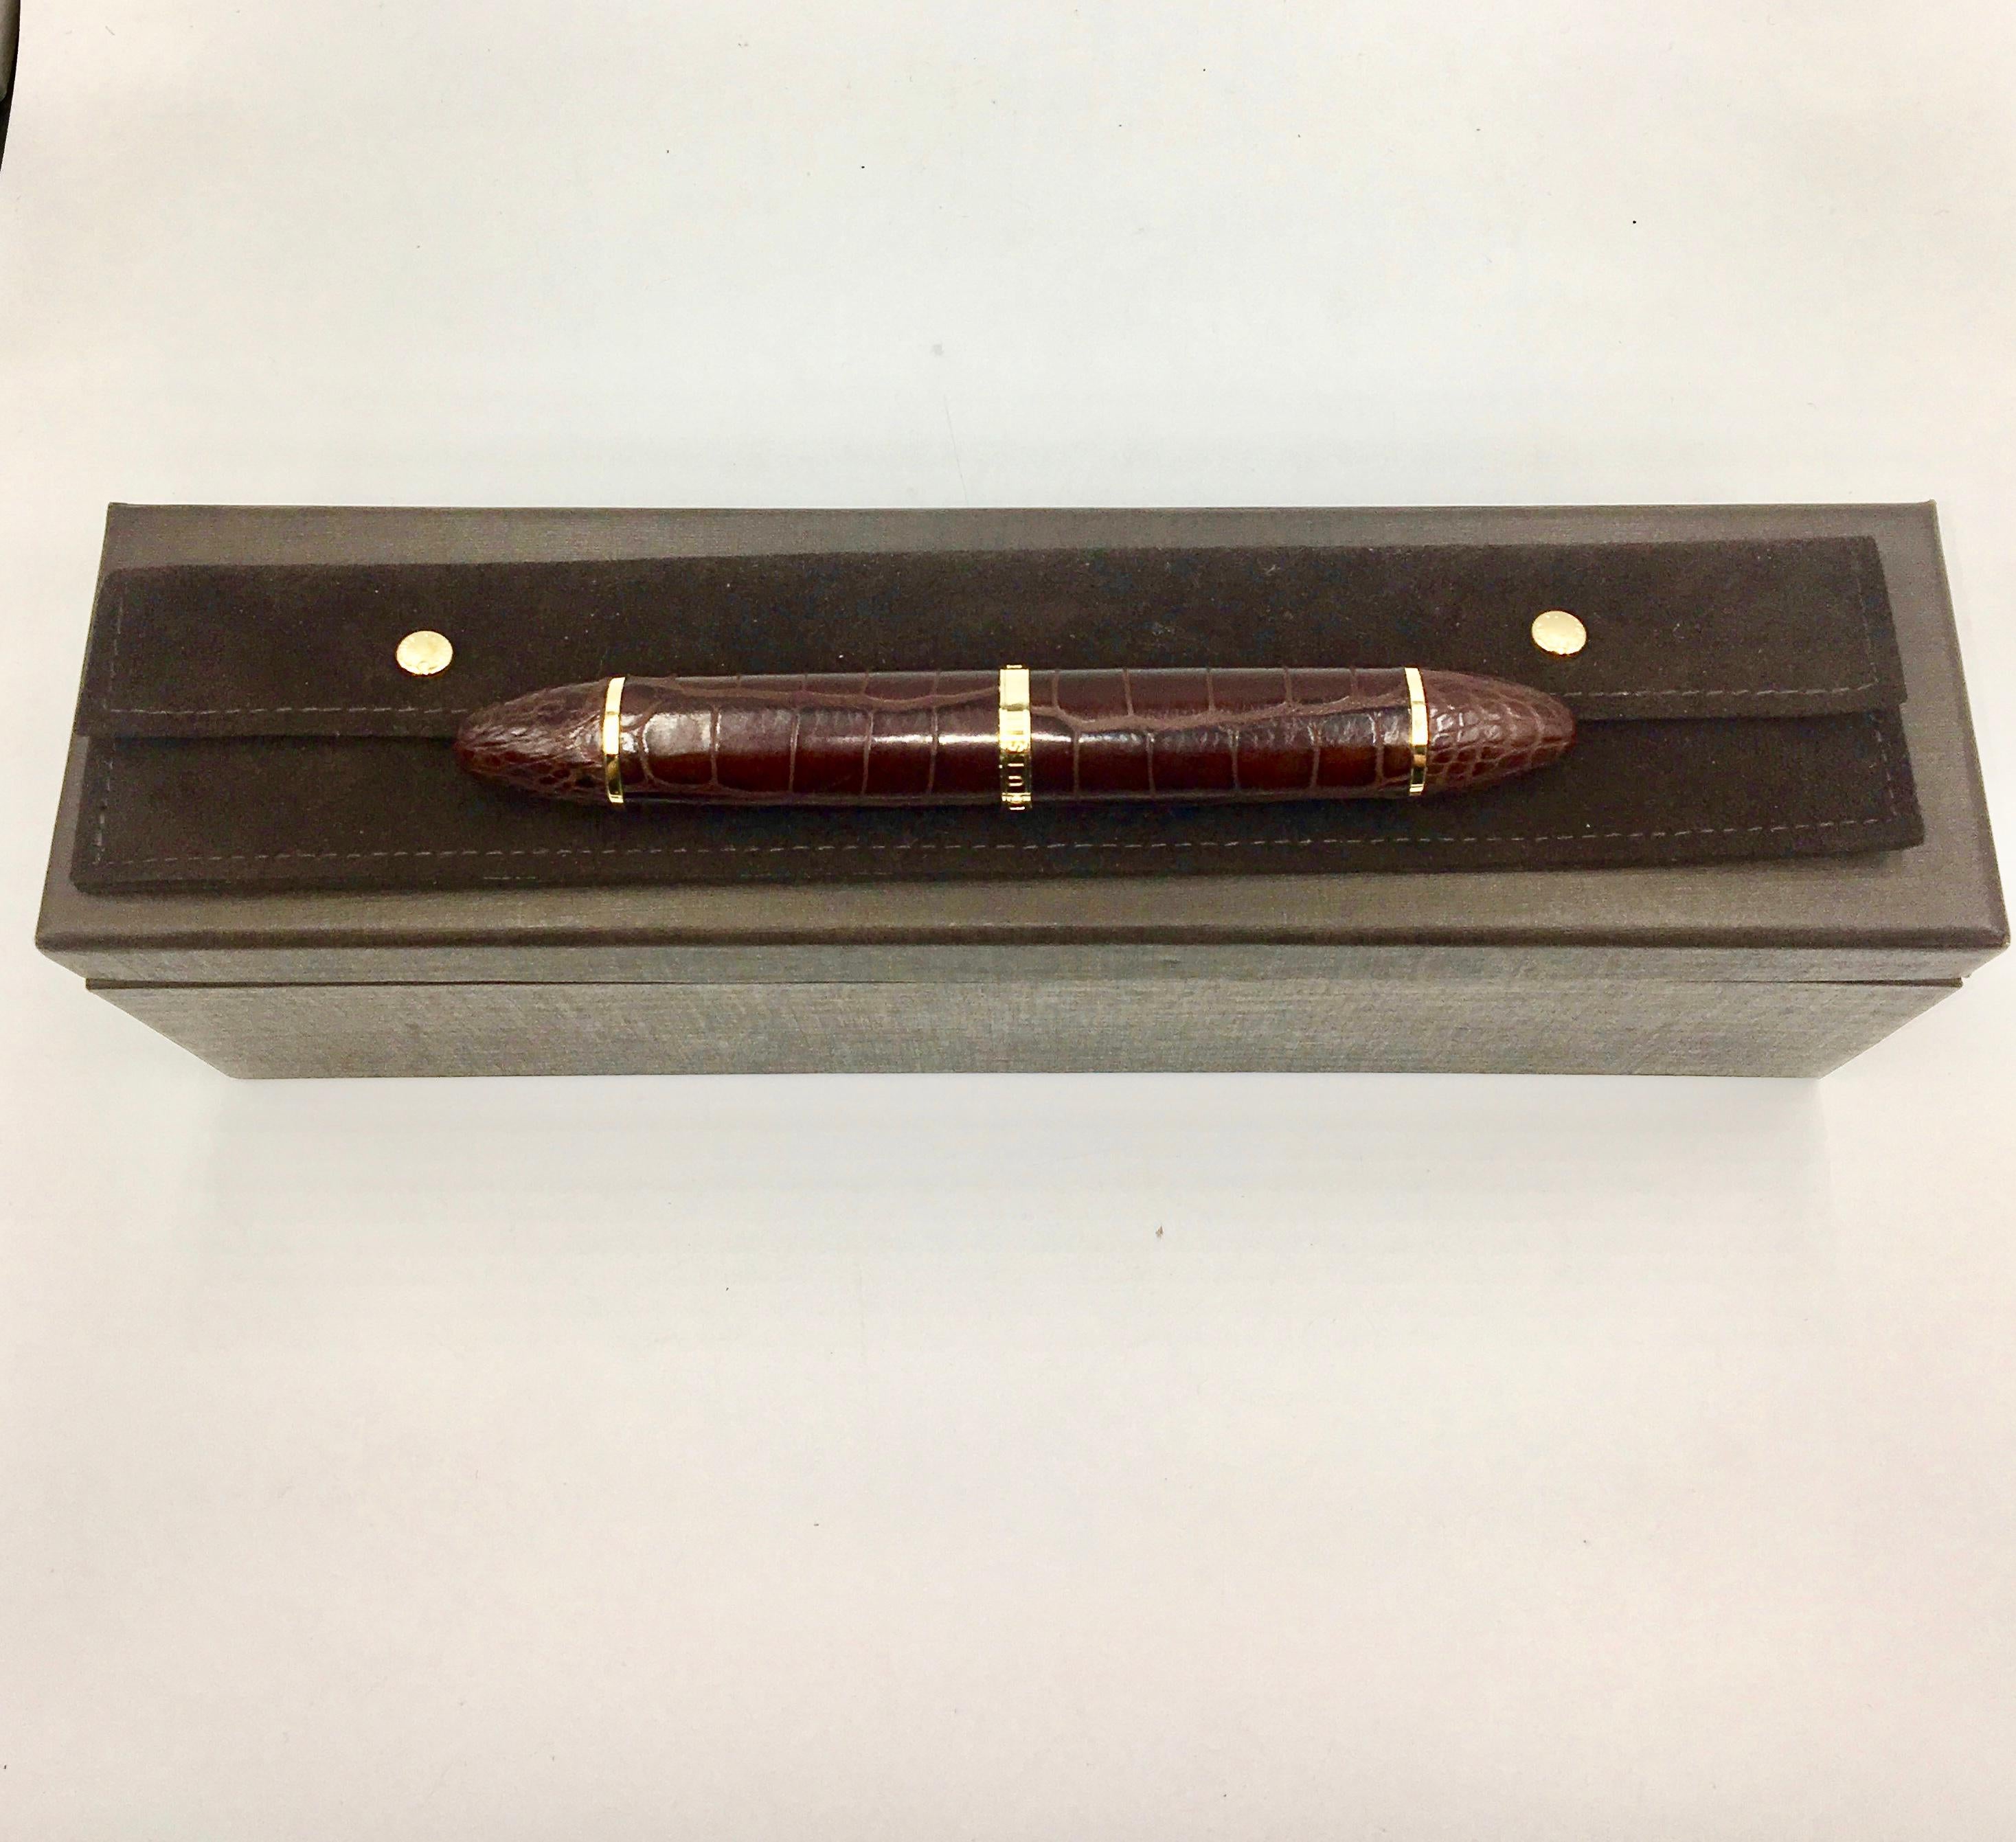 The Louis Vuitton Cargo Ink Pen is incased in the leather of the Alligator Mississipiensis. This foutain pen is a remarkable combination of elegance and technicity with an exclusive LV patent.
Original complete box